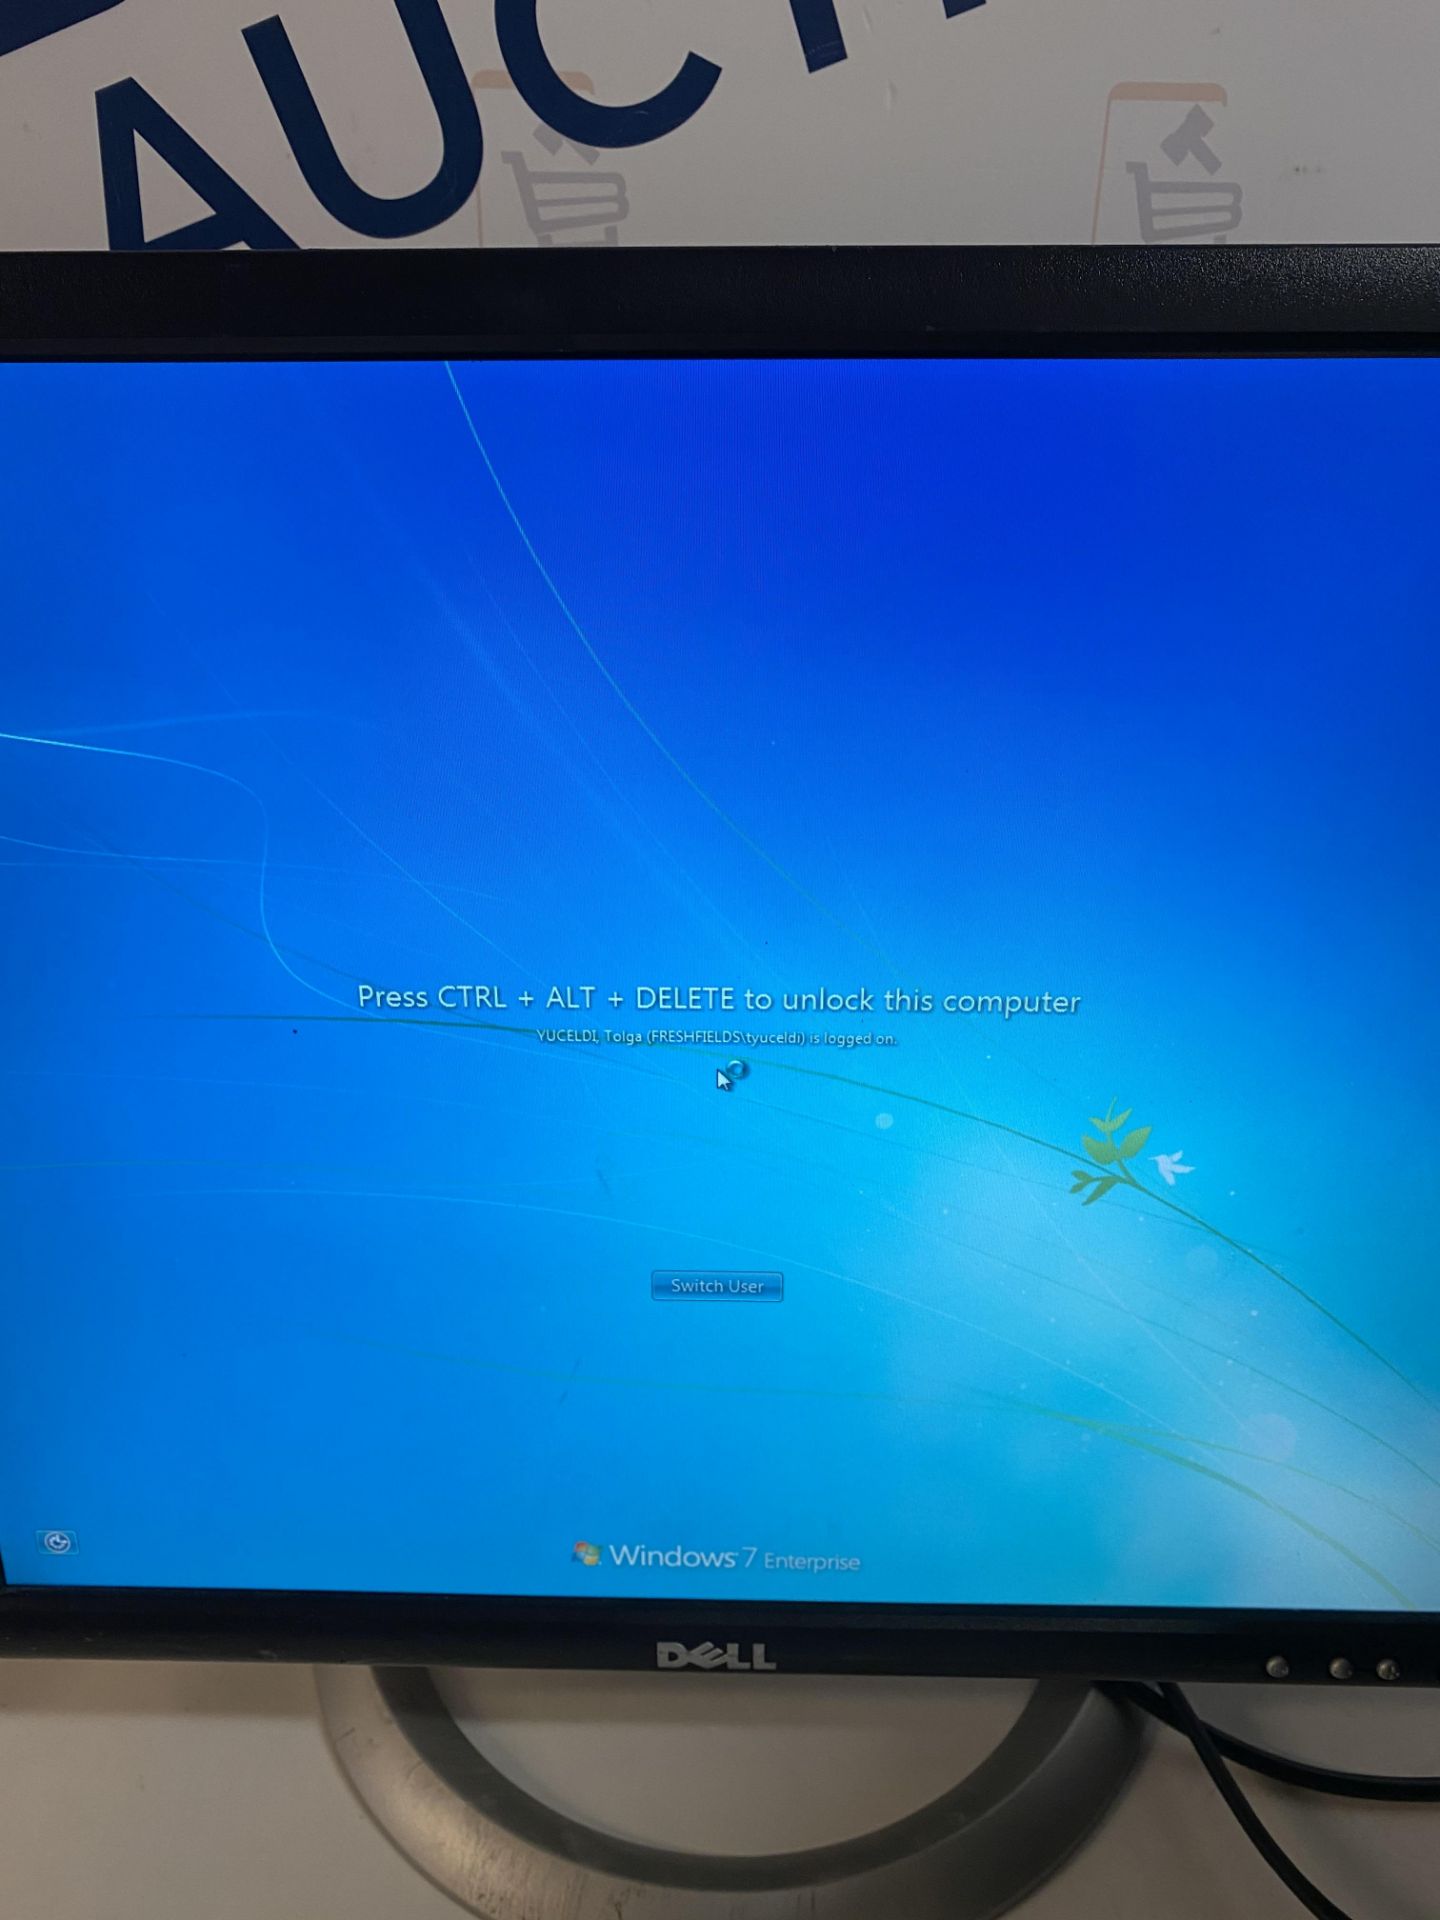 Dell Optiplex 7010 i5 Desktop PC (monitor used for testing purposes only, see images) - Image 5 of 6